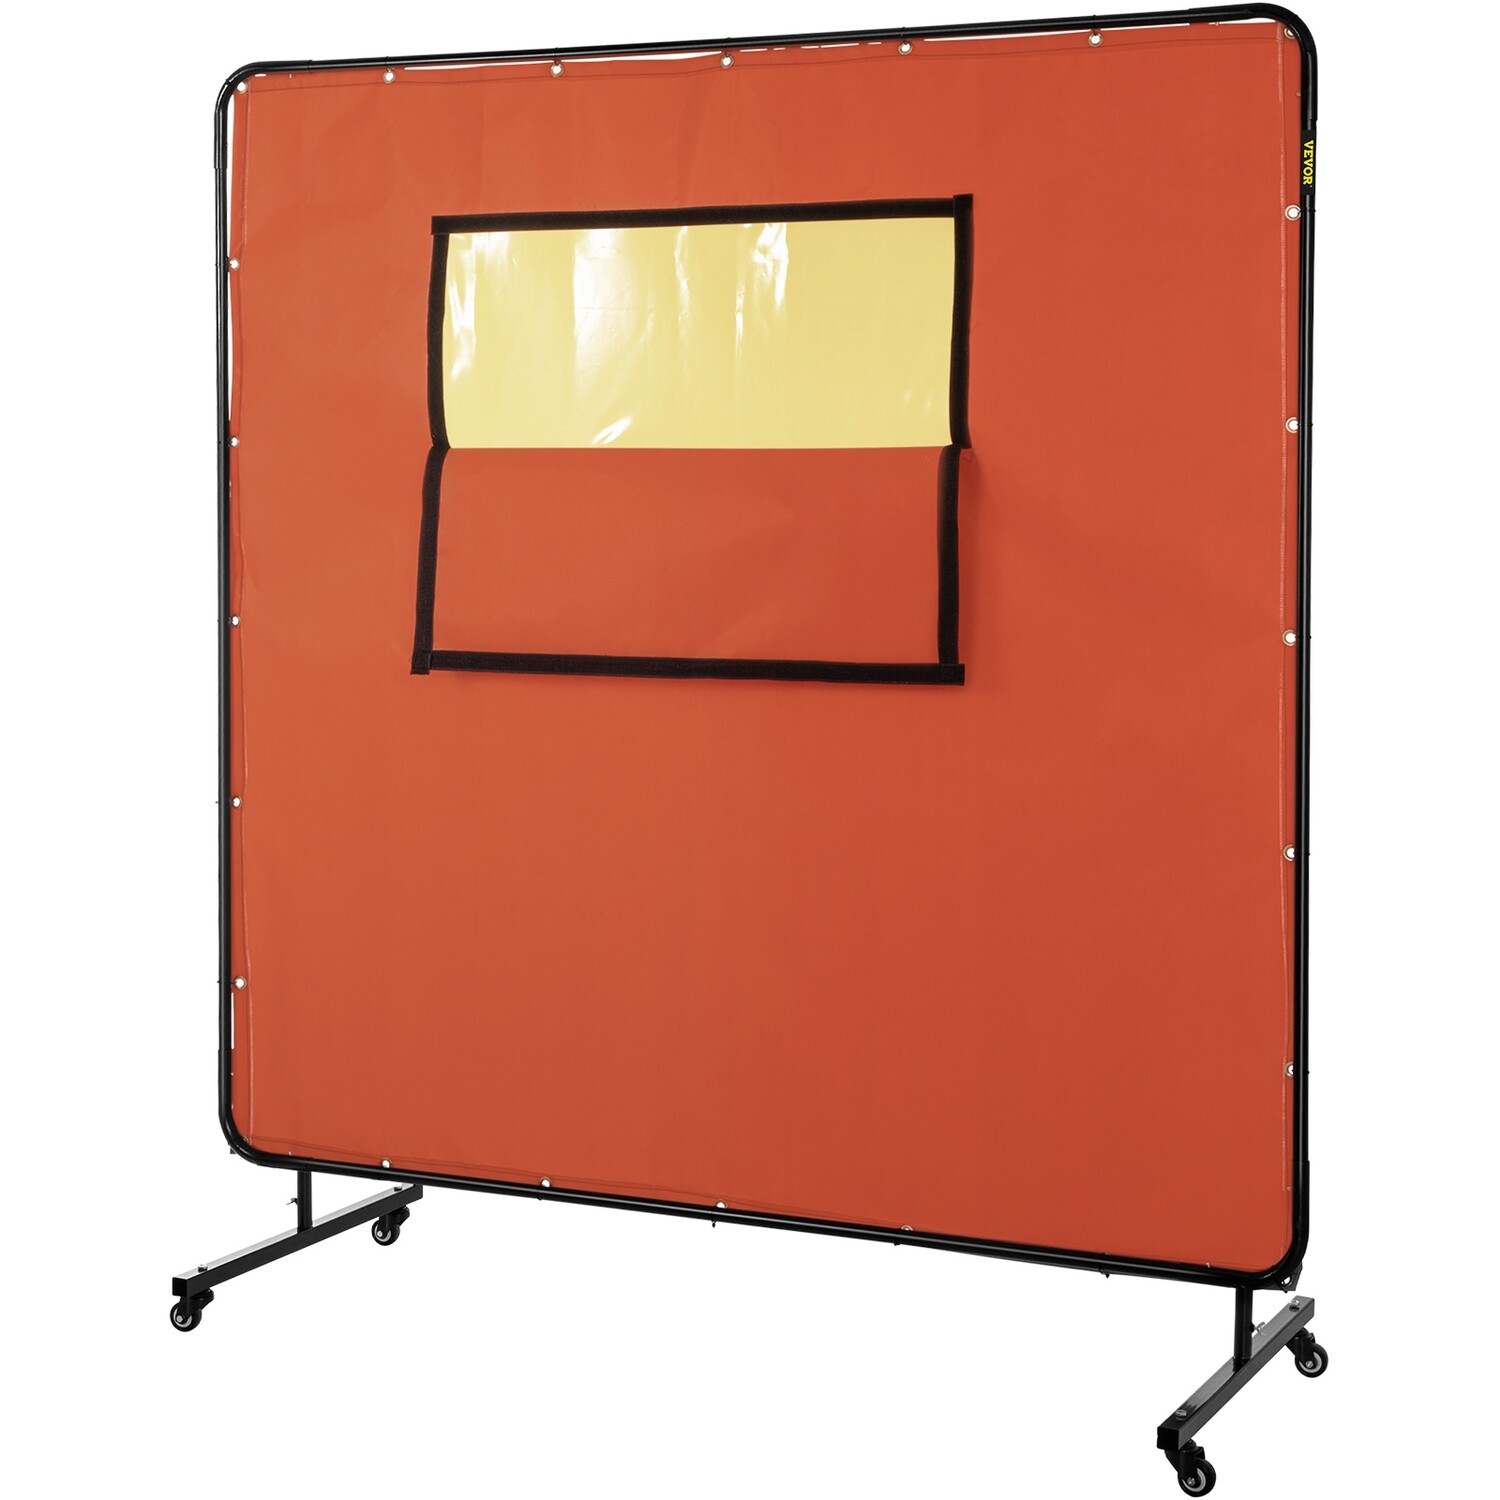 Drywall Curtain Fiberglass 6' x 6' Welding Screen Frame with Window and Caster